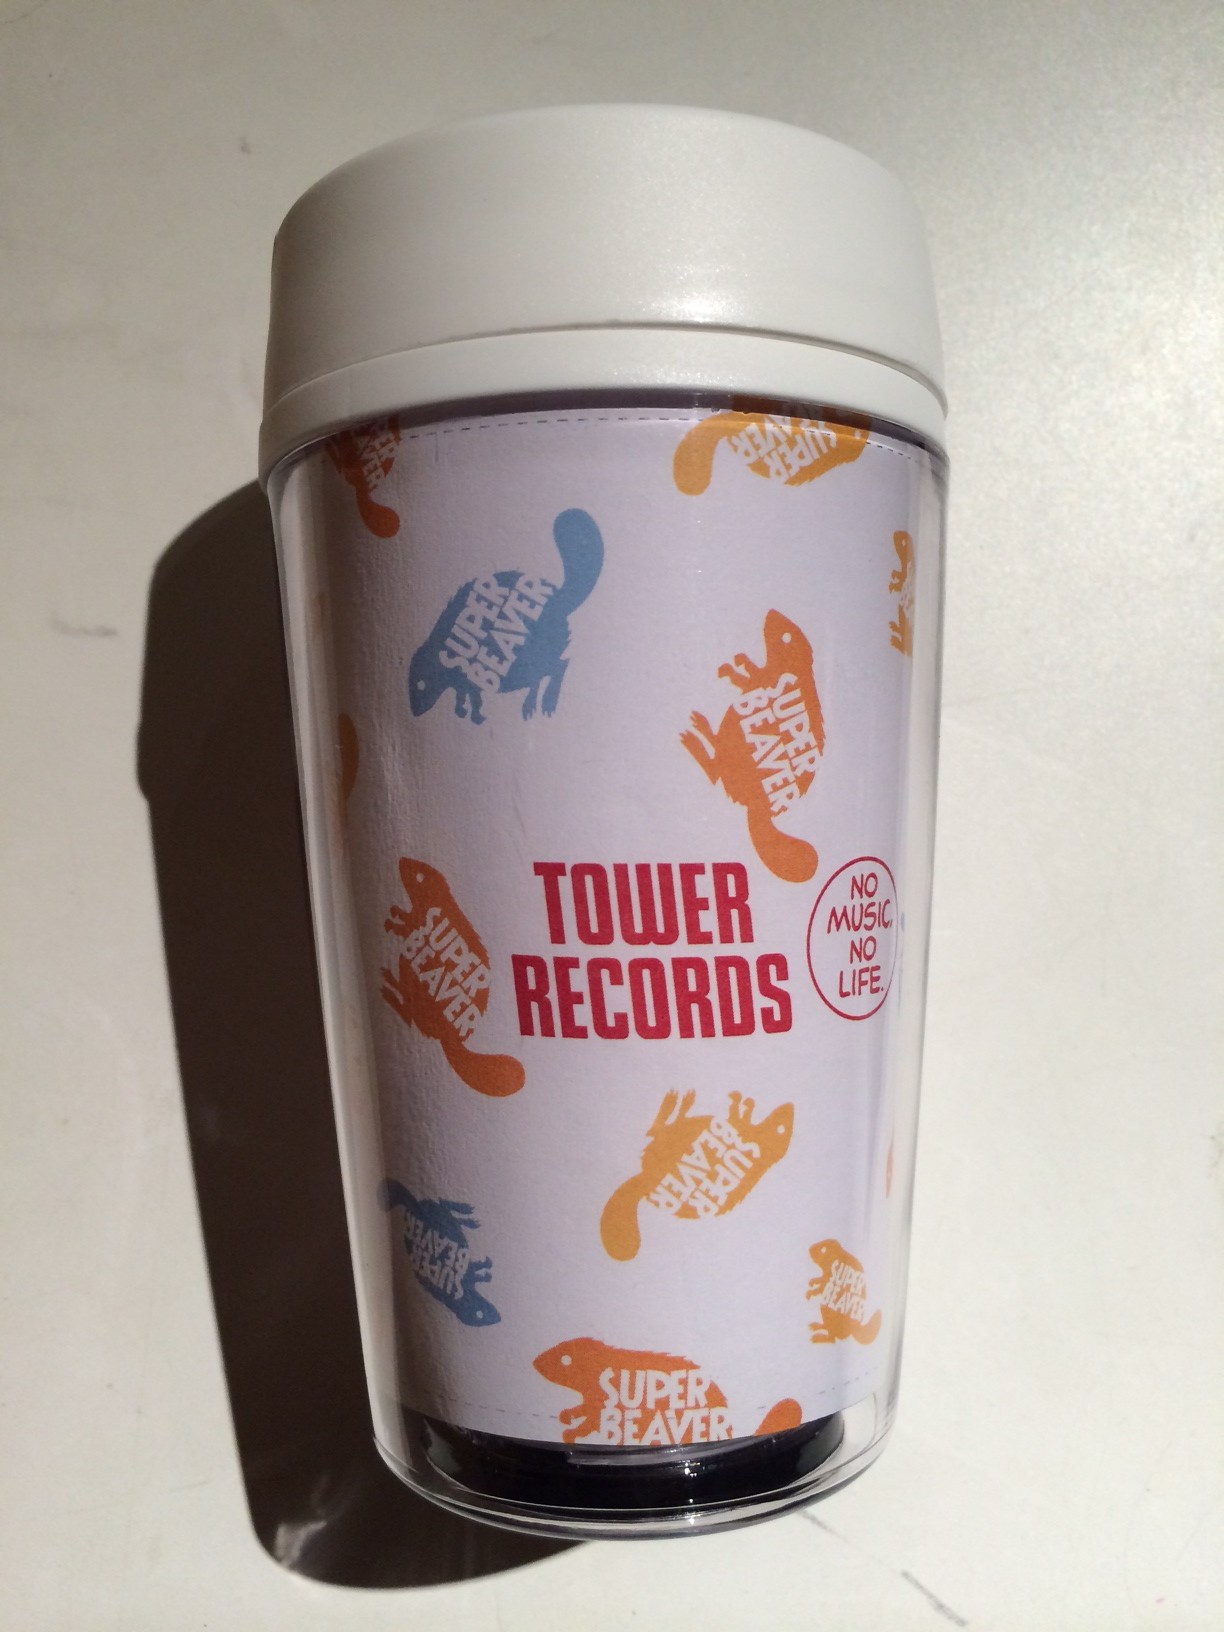 TOWER RECORDSコラボグッズ発売のお知らせ | SUPER BEAVER OFFICIAL WEB